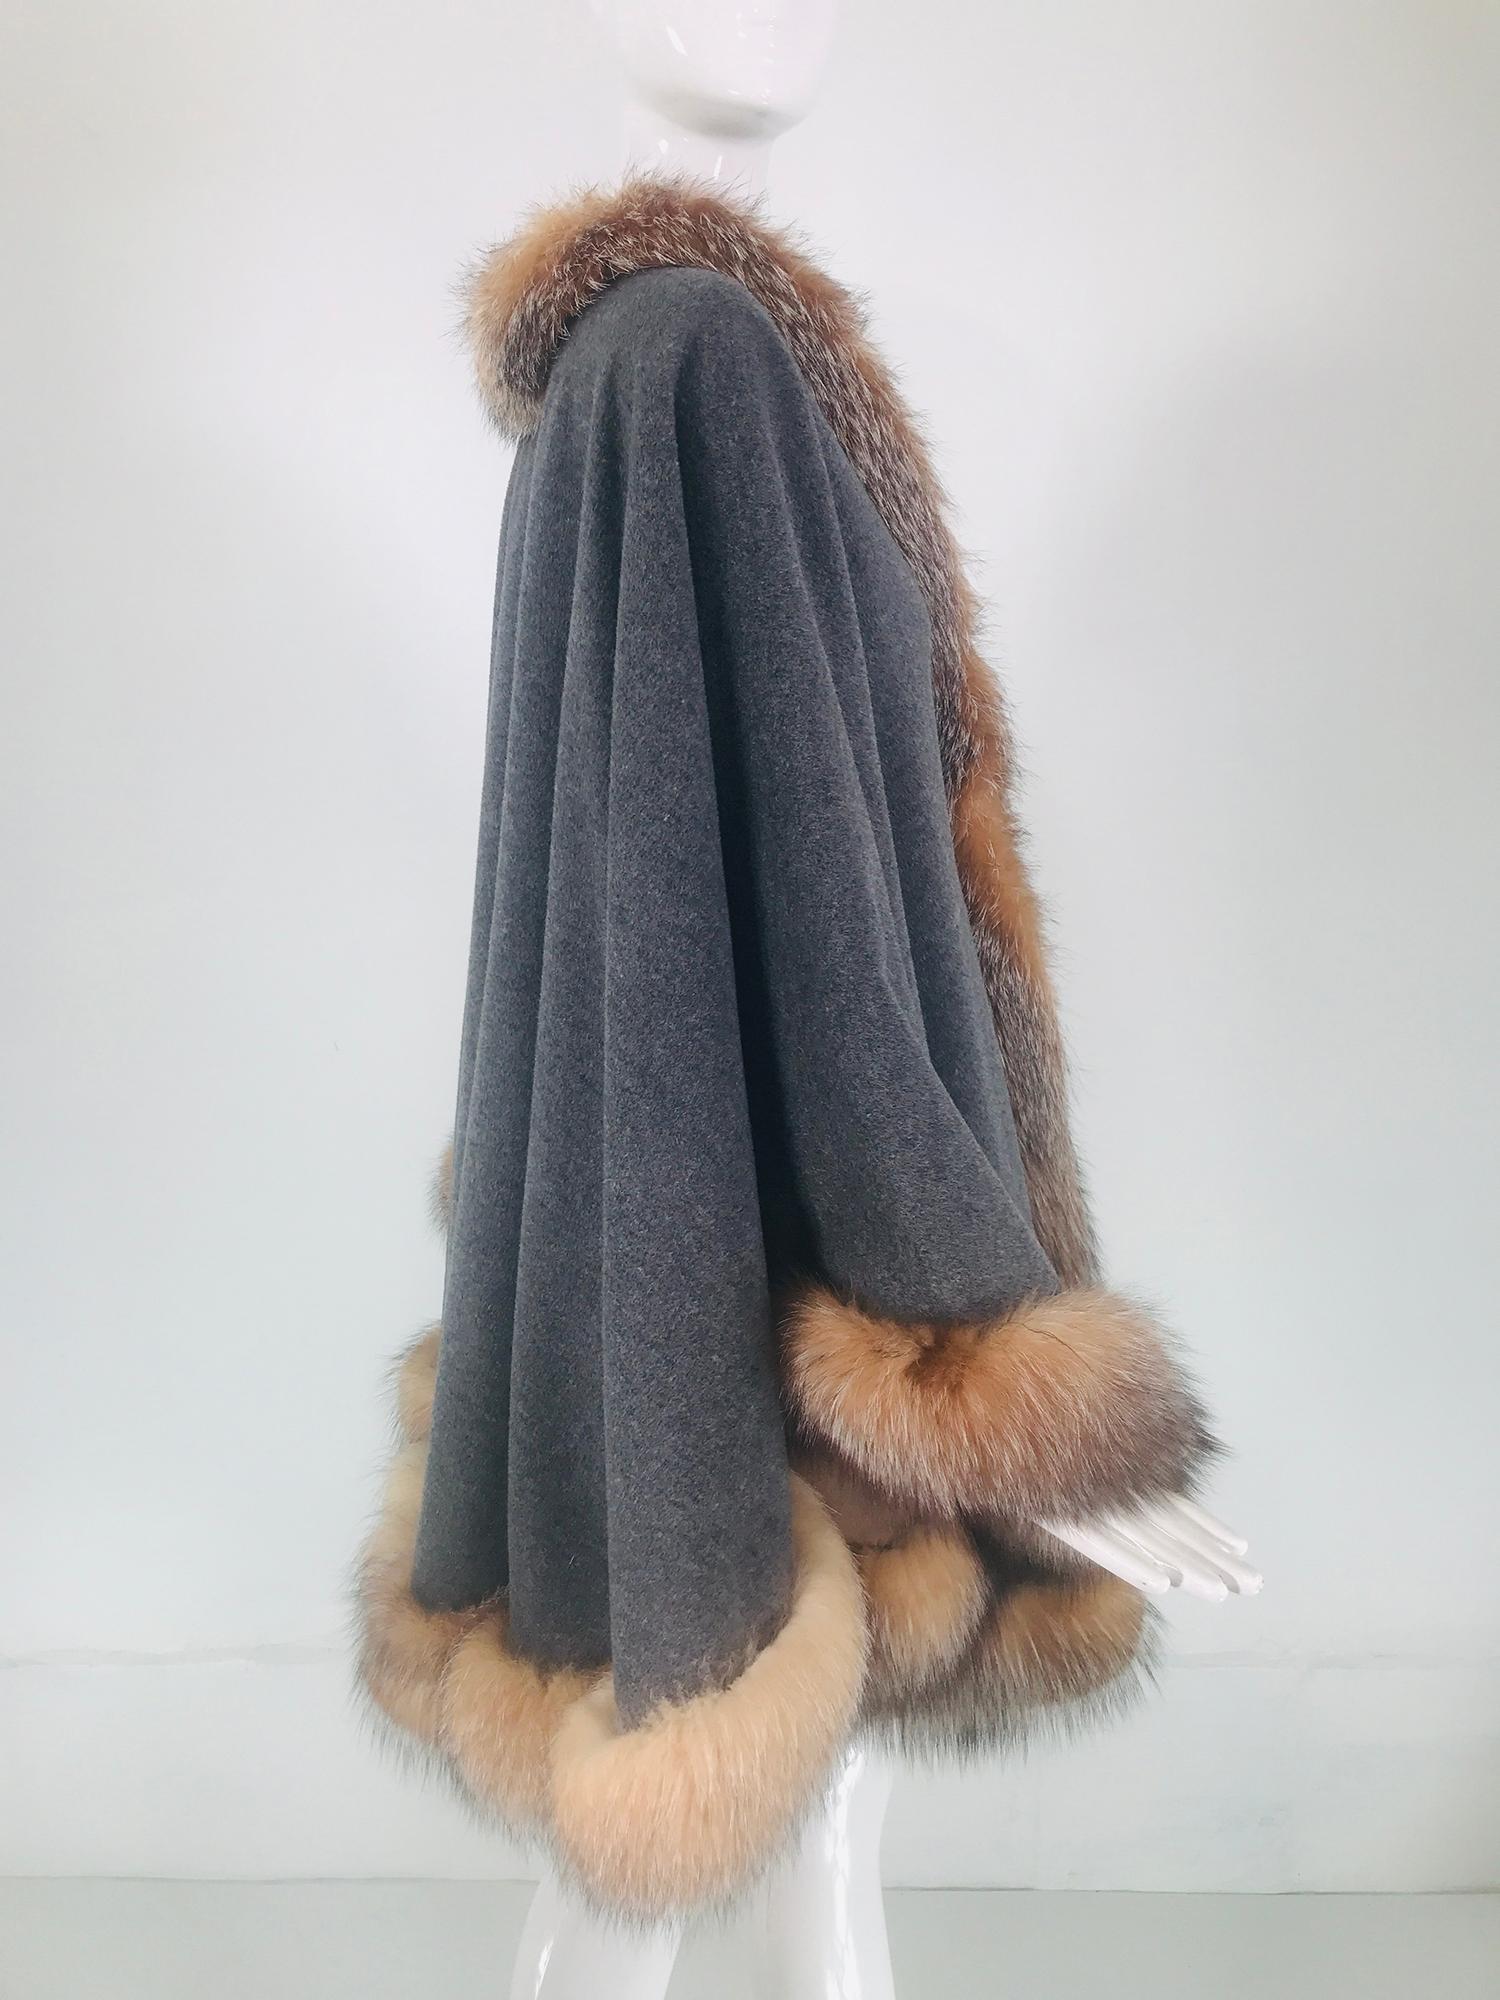 Sprung Freres Paris Red Fox Wool/Cashmere Reversible Cape Grey/Camel Tan OS 7